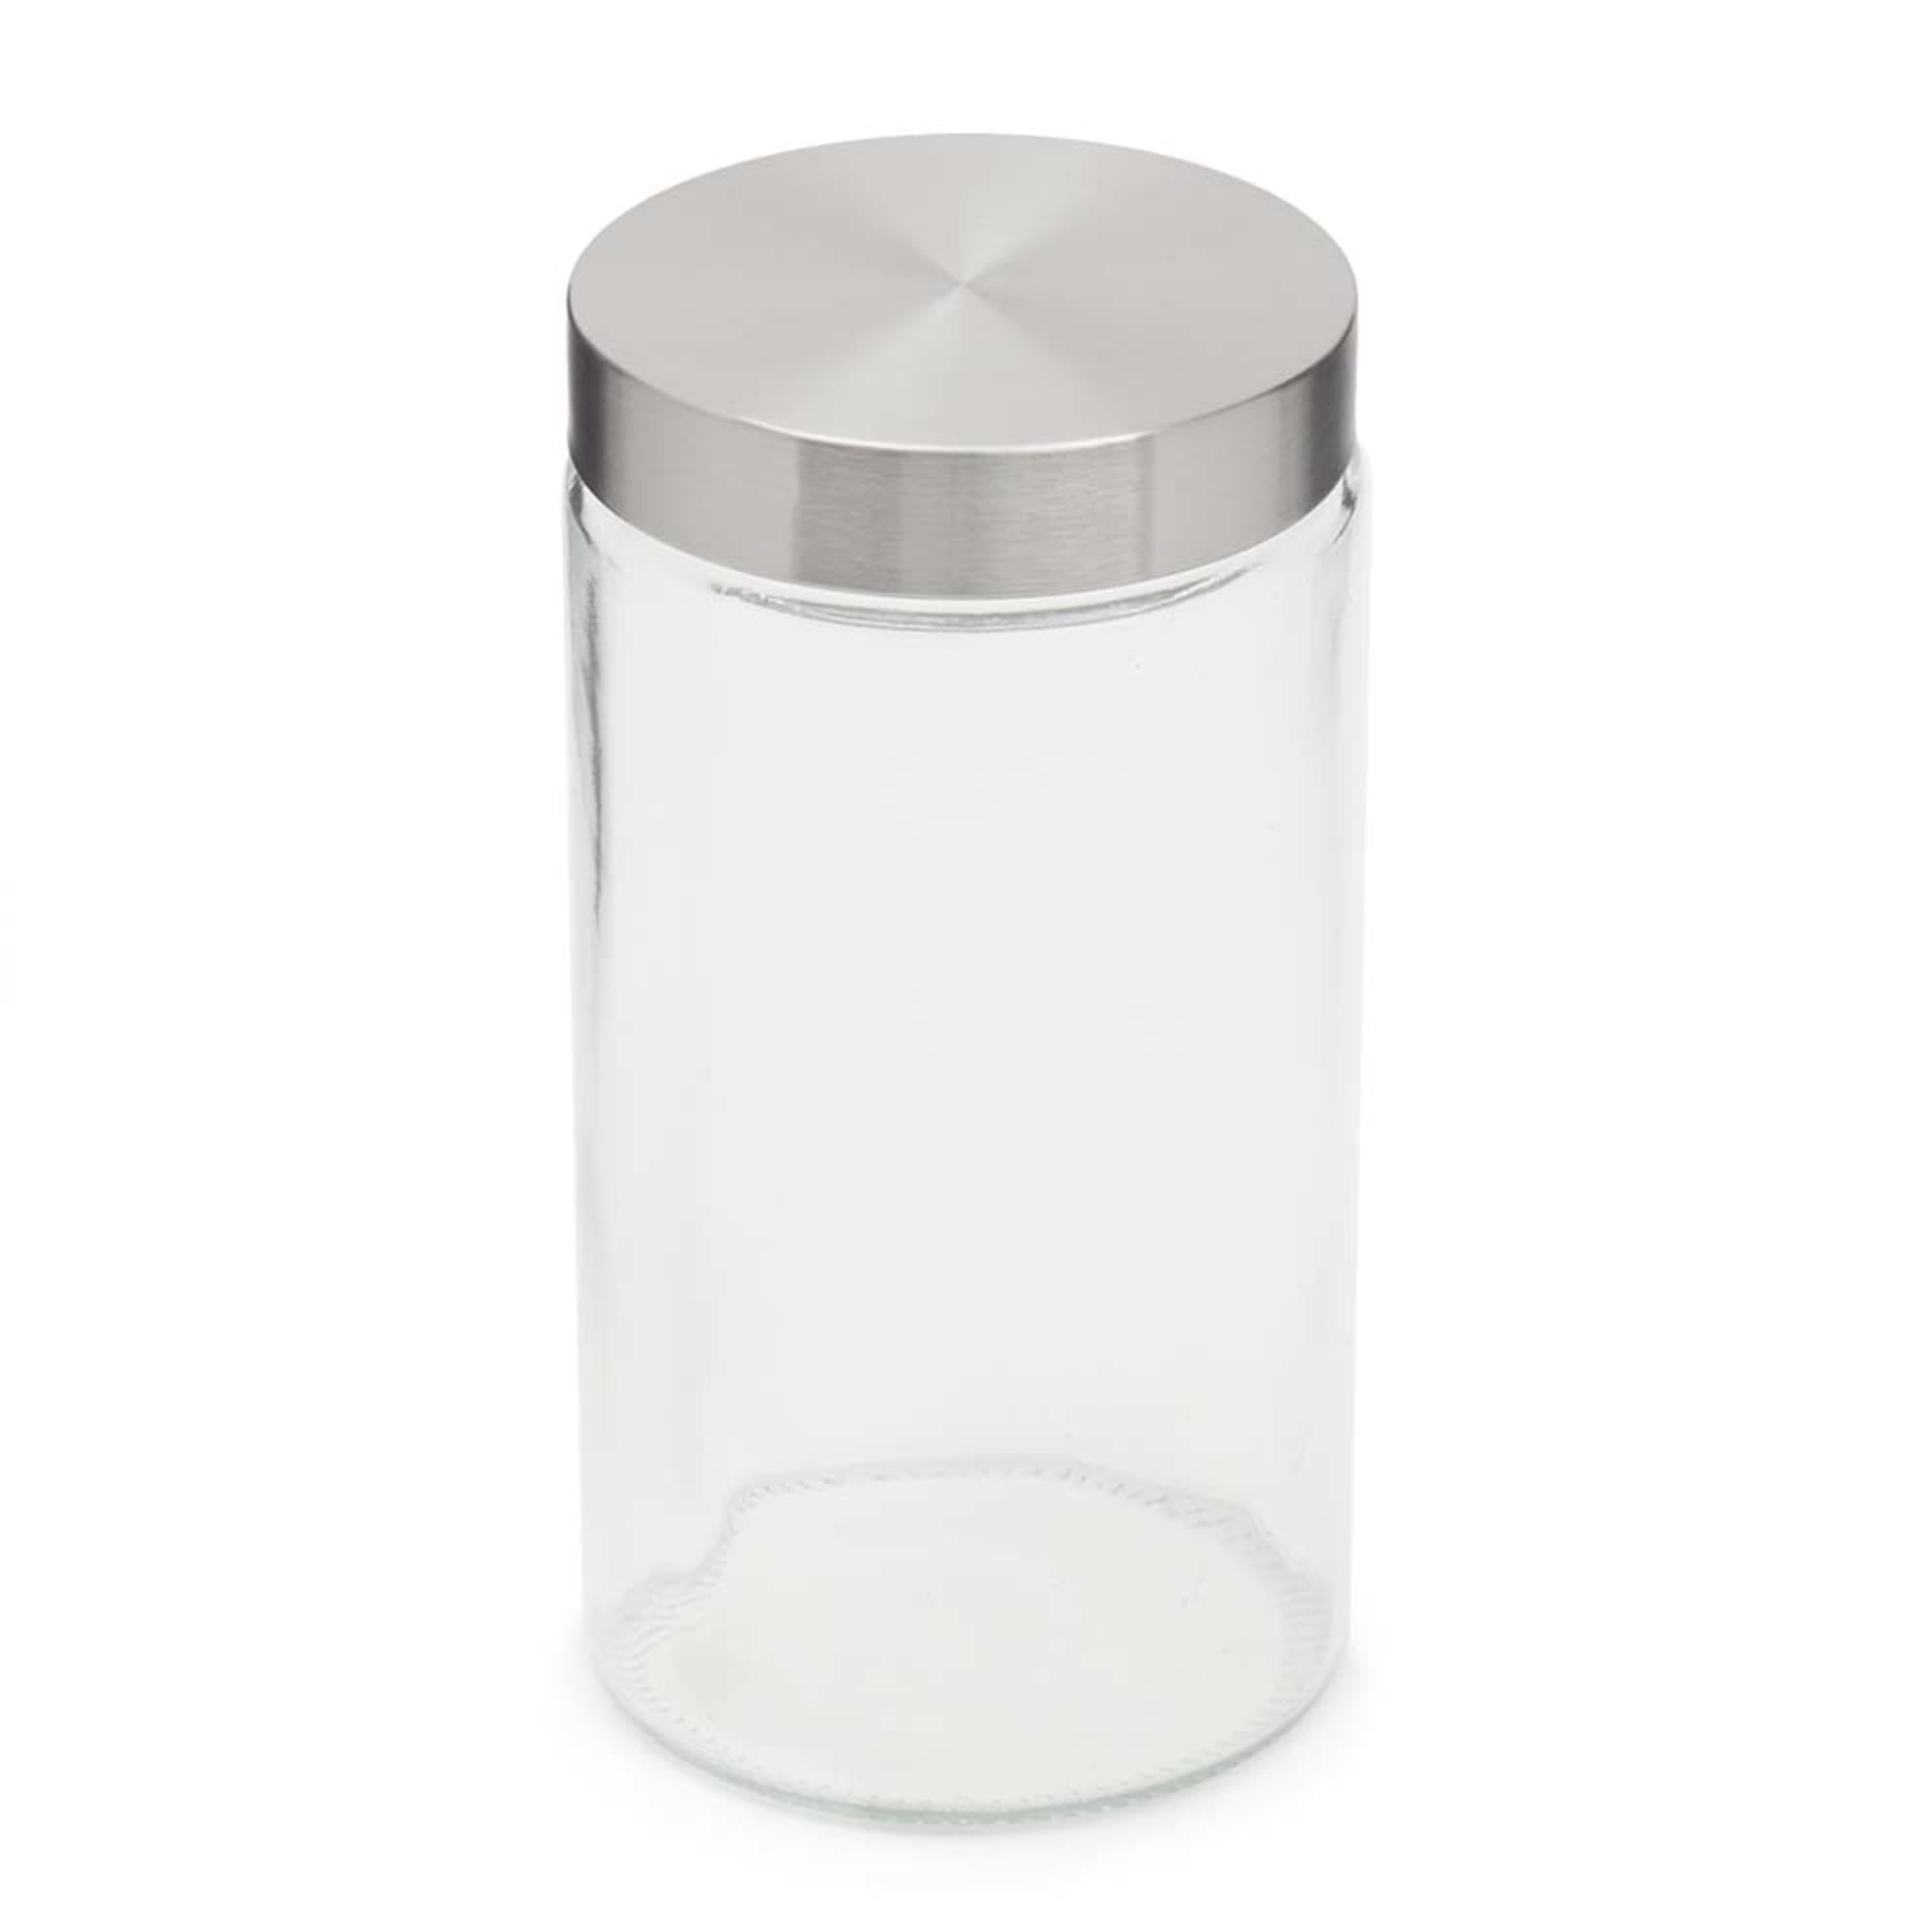 Set of 3 PLAIN Stainless Steel Polished Canisters Jars See through Clear Lid